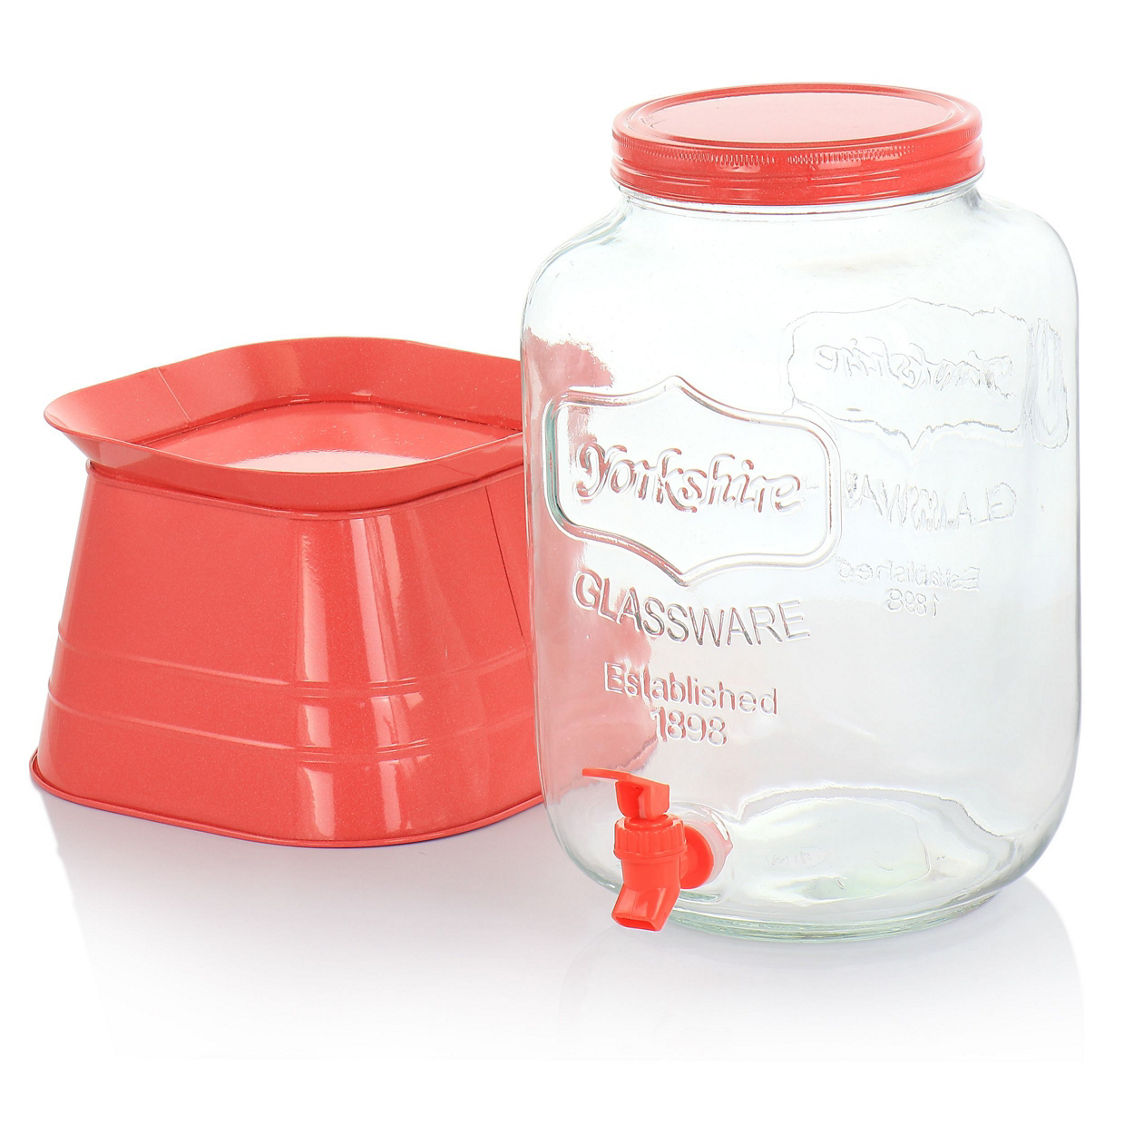 Gibson Home Chiara 2 Gallon Glass Mason Jar Dispenser with Metal Lid and Base in - Image 3 of 5